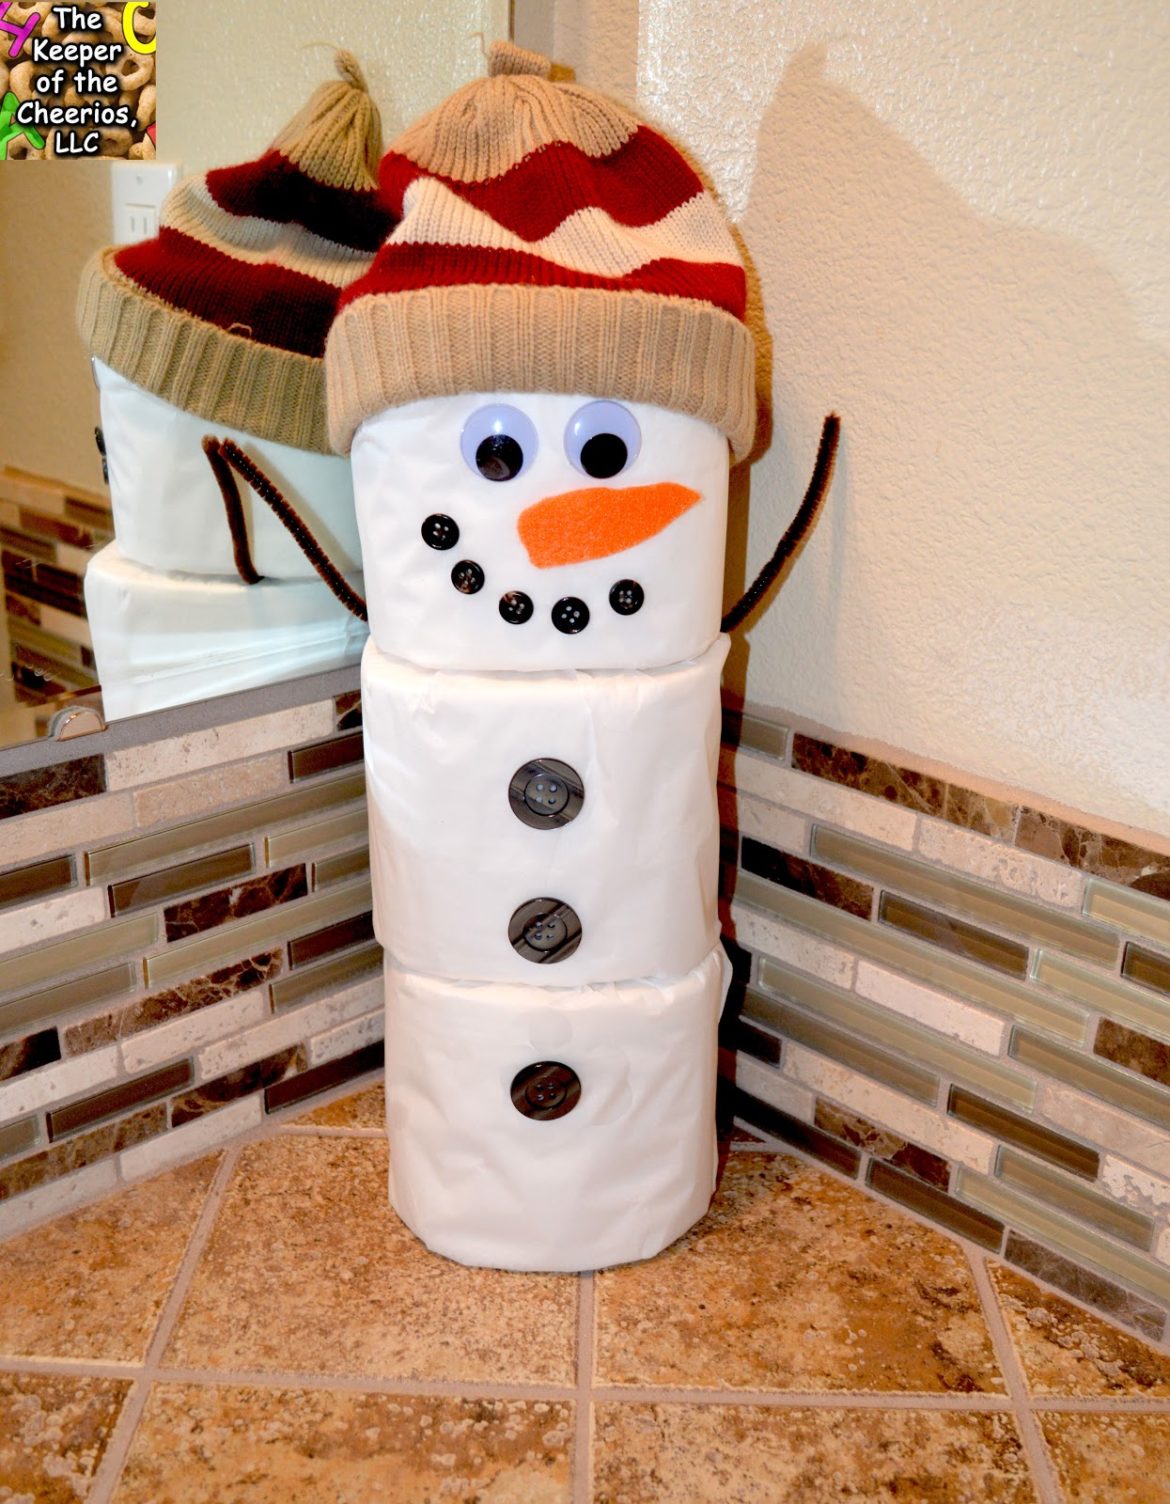 How-to Craft a Toilet Paper Roll Snowman